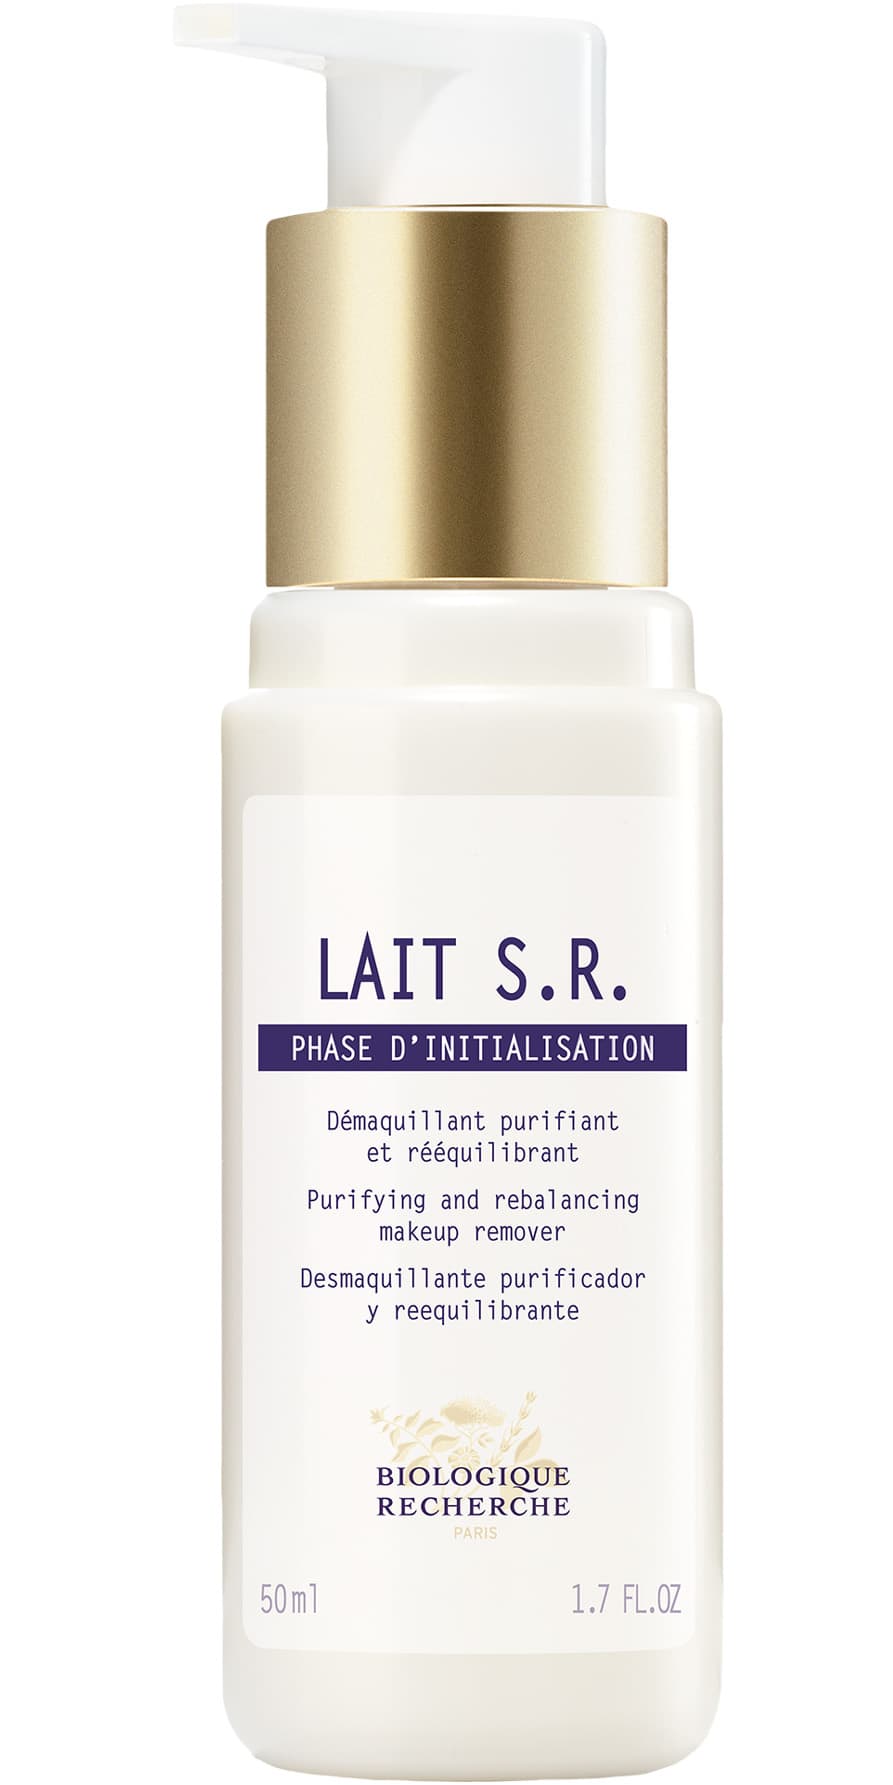 variant-50ml-product-page-image